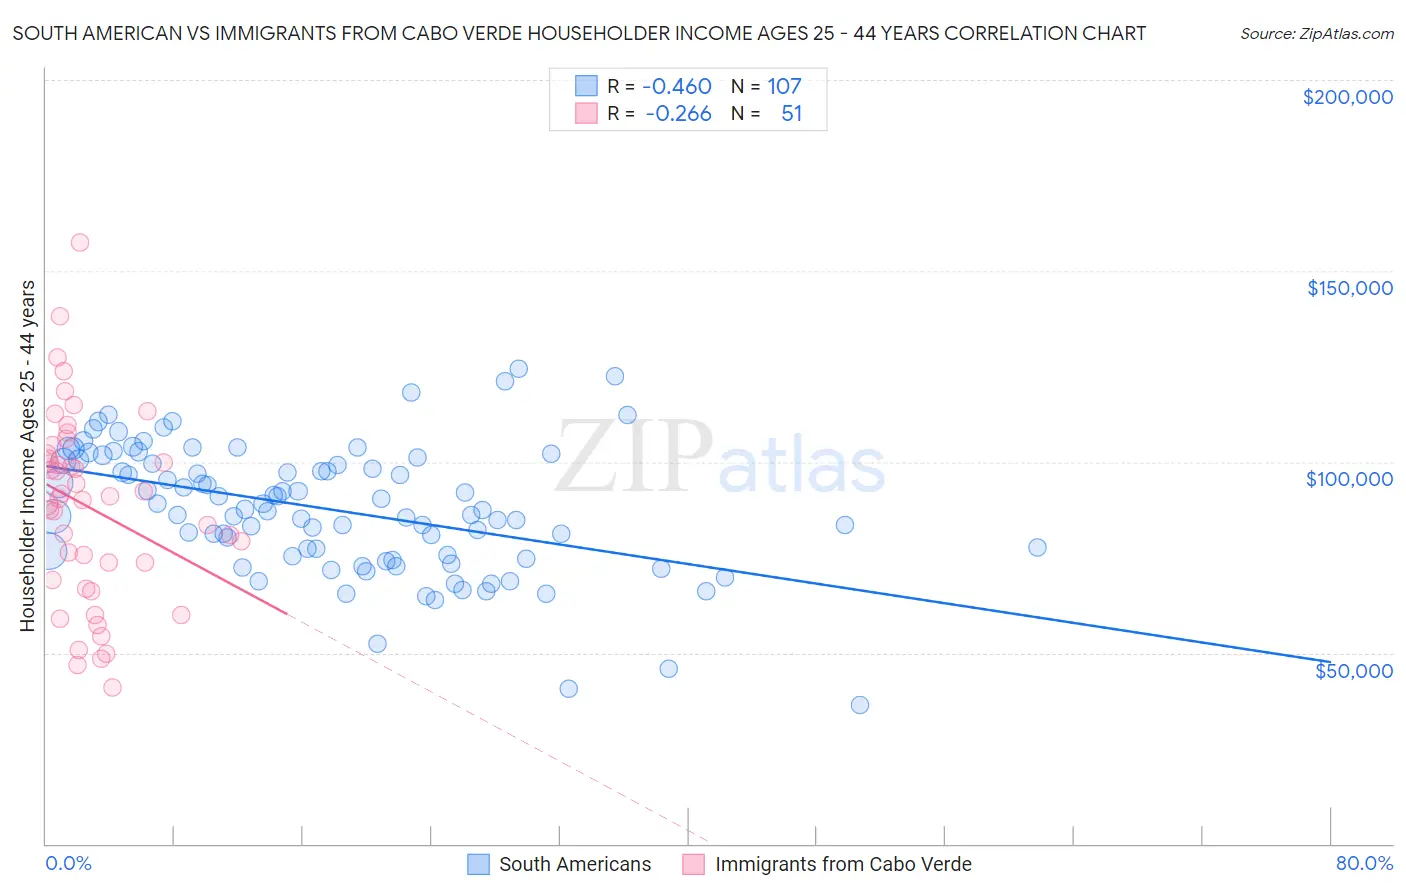 South American vs Immigrants from Cabo Verde Householder Income Ages 25 - 44 years